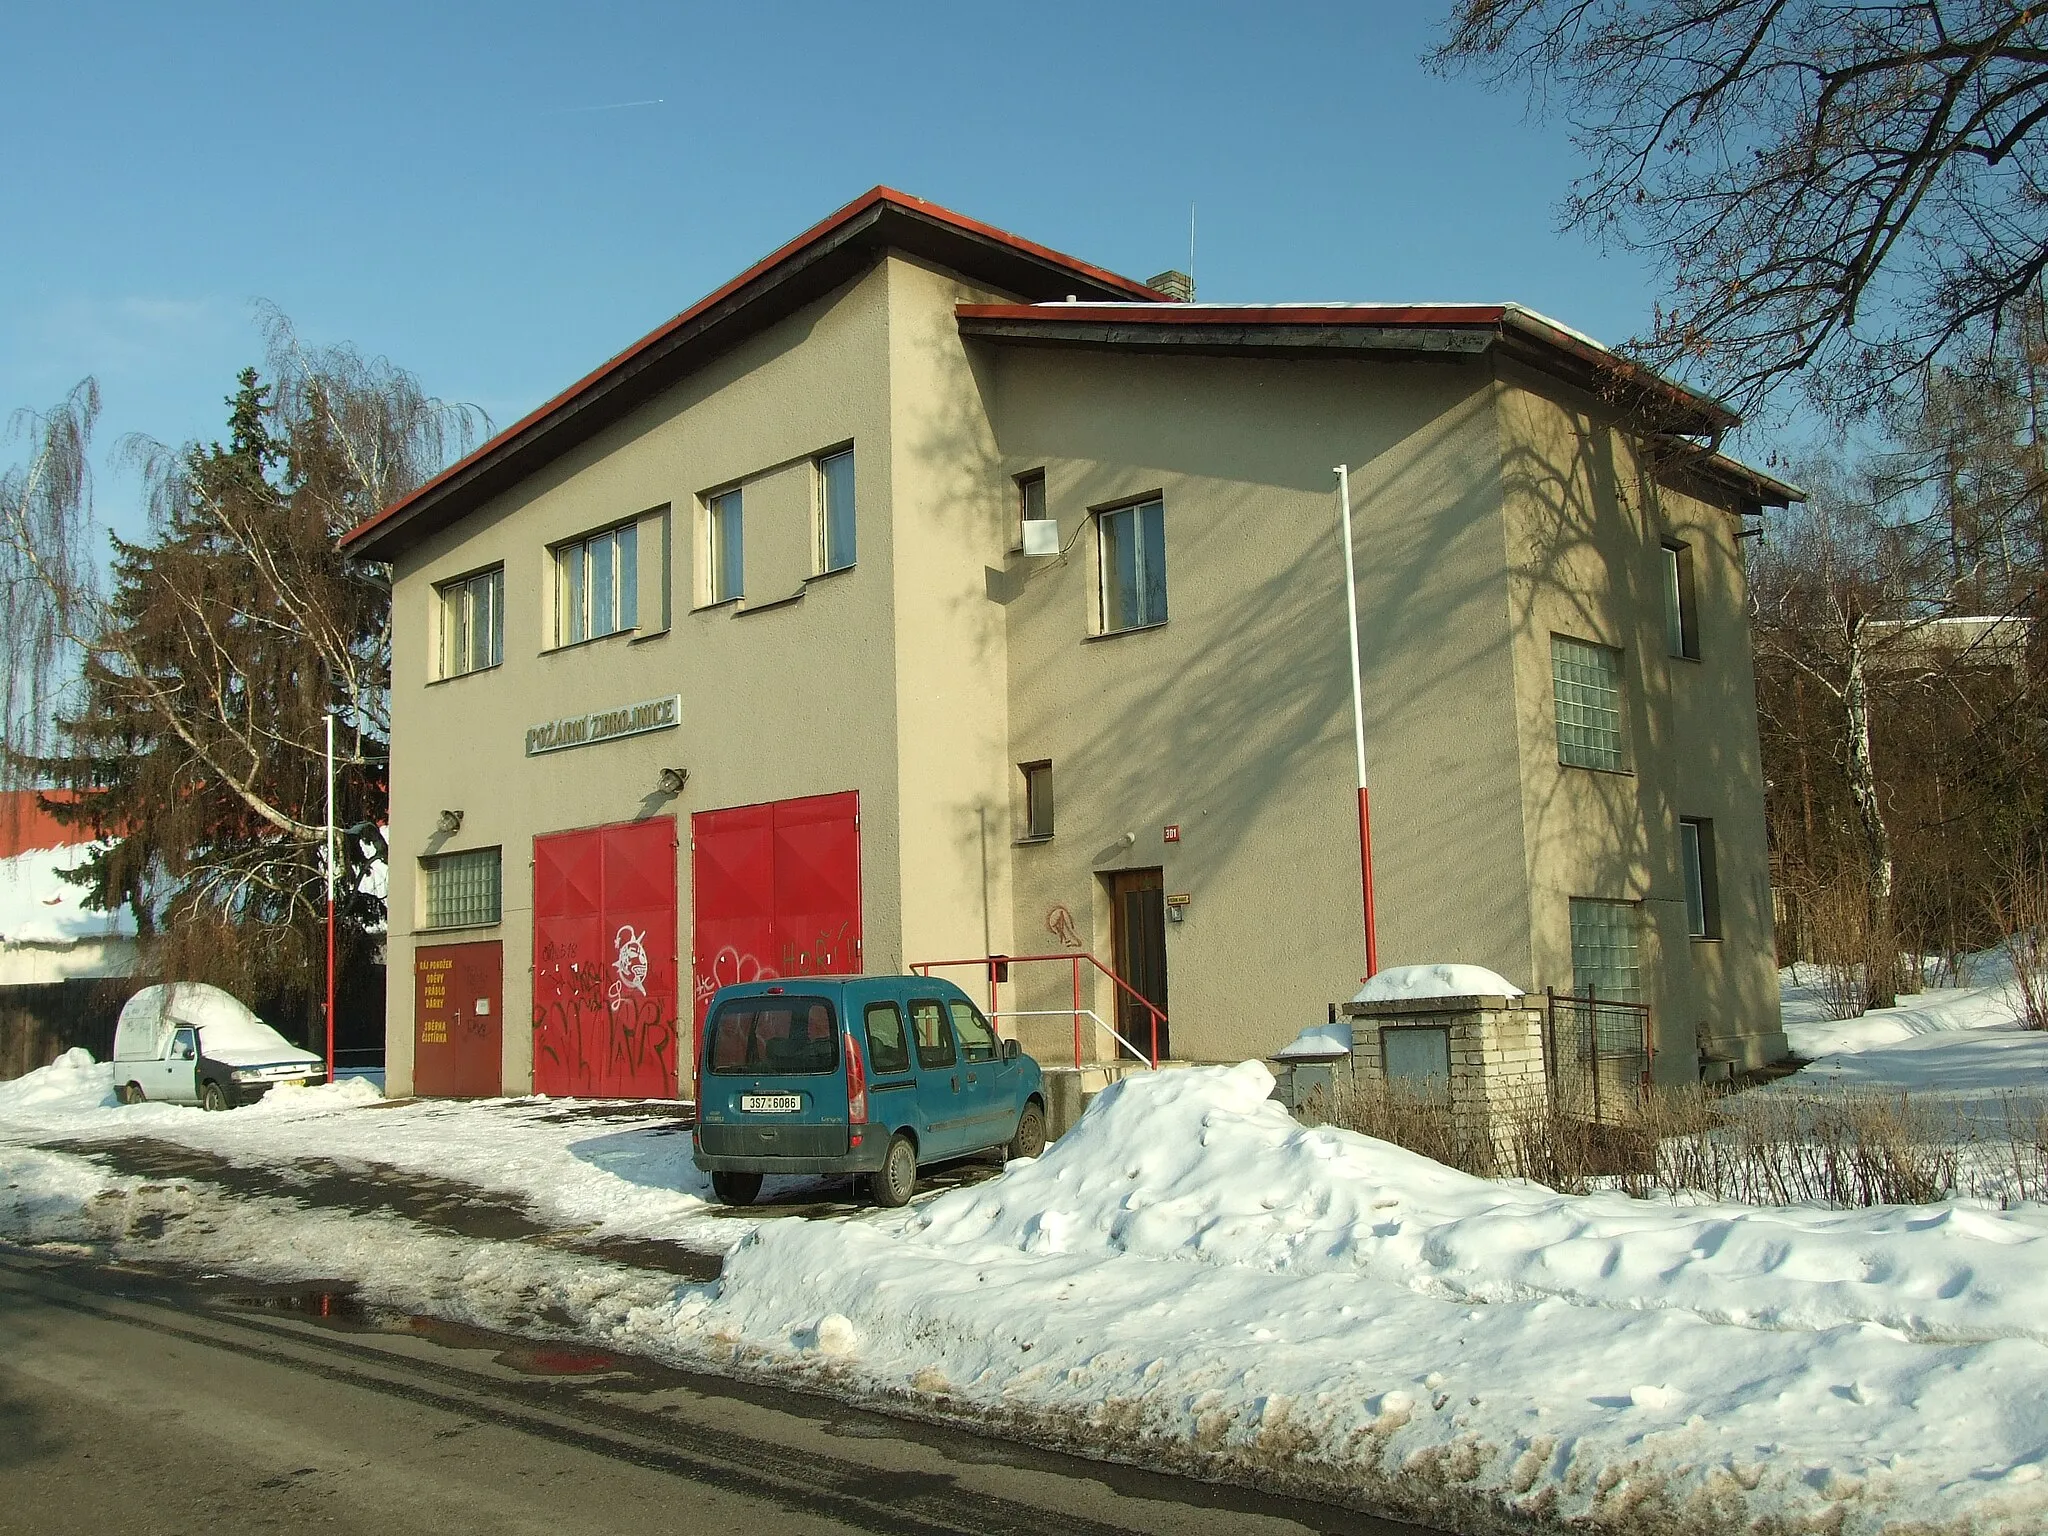 Photo showing: Local firefighter's building in Klecany, village near Prague, Central Bohemian Region, CZ